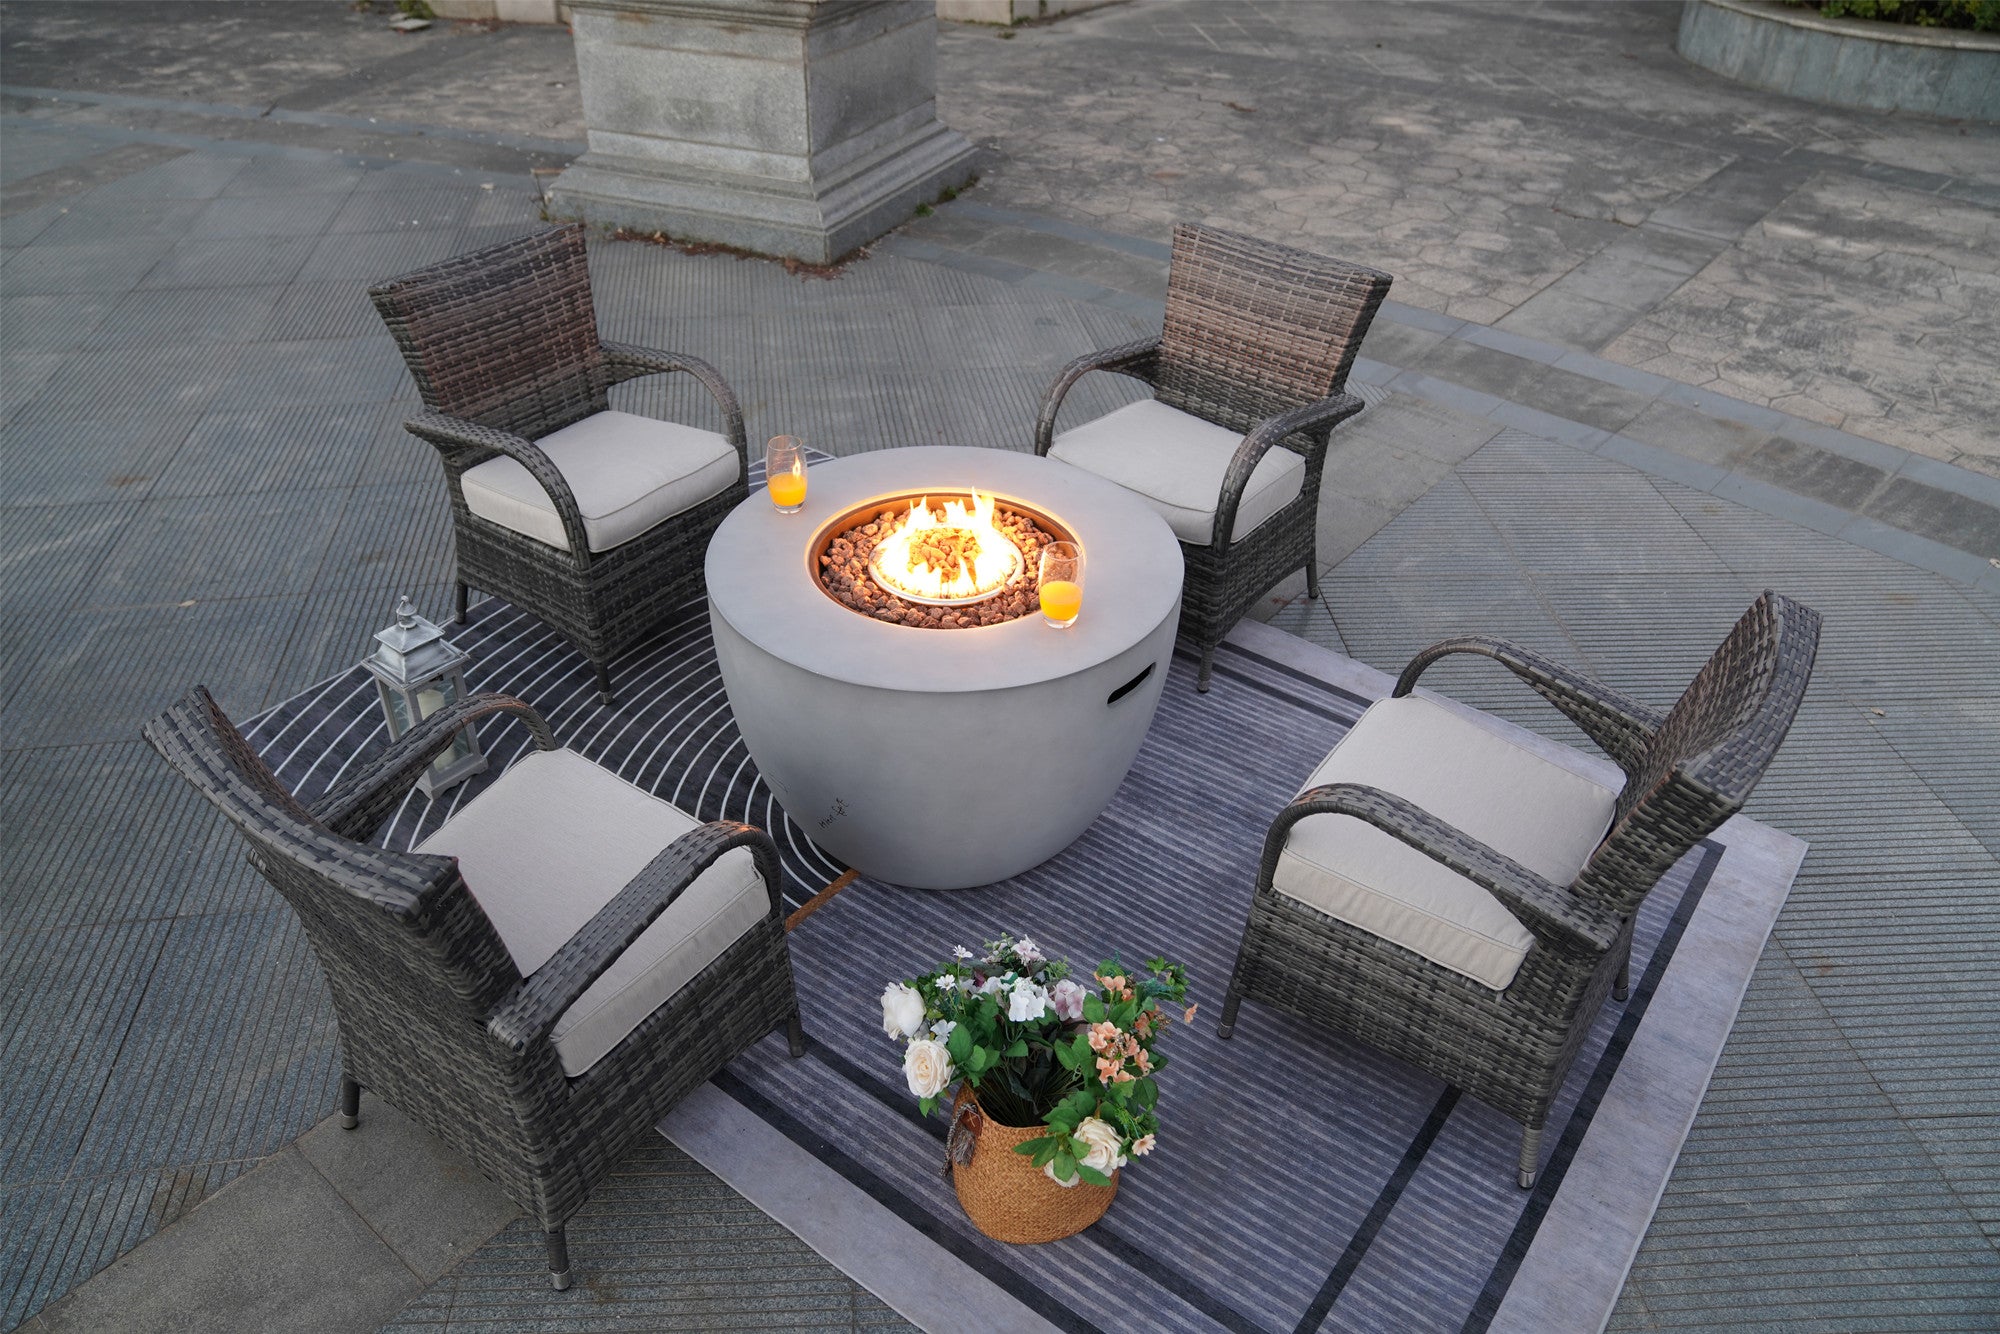 5 Pieces Fire Table Wicker Chair Set